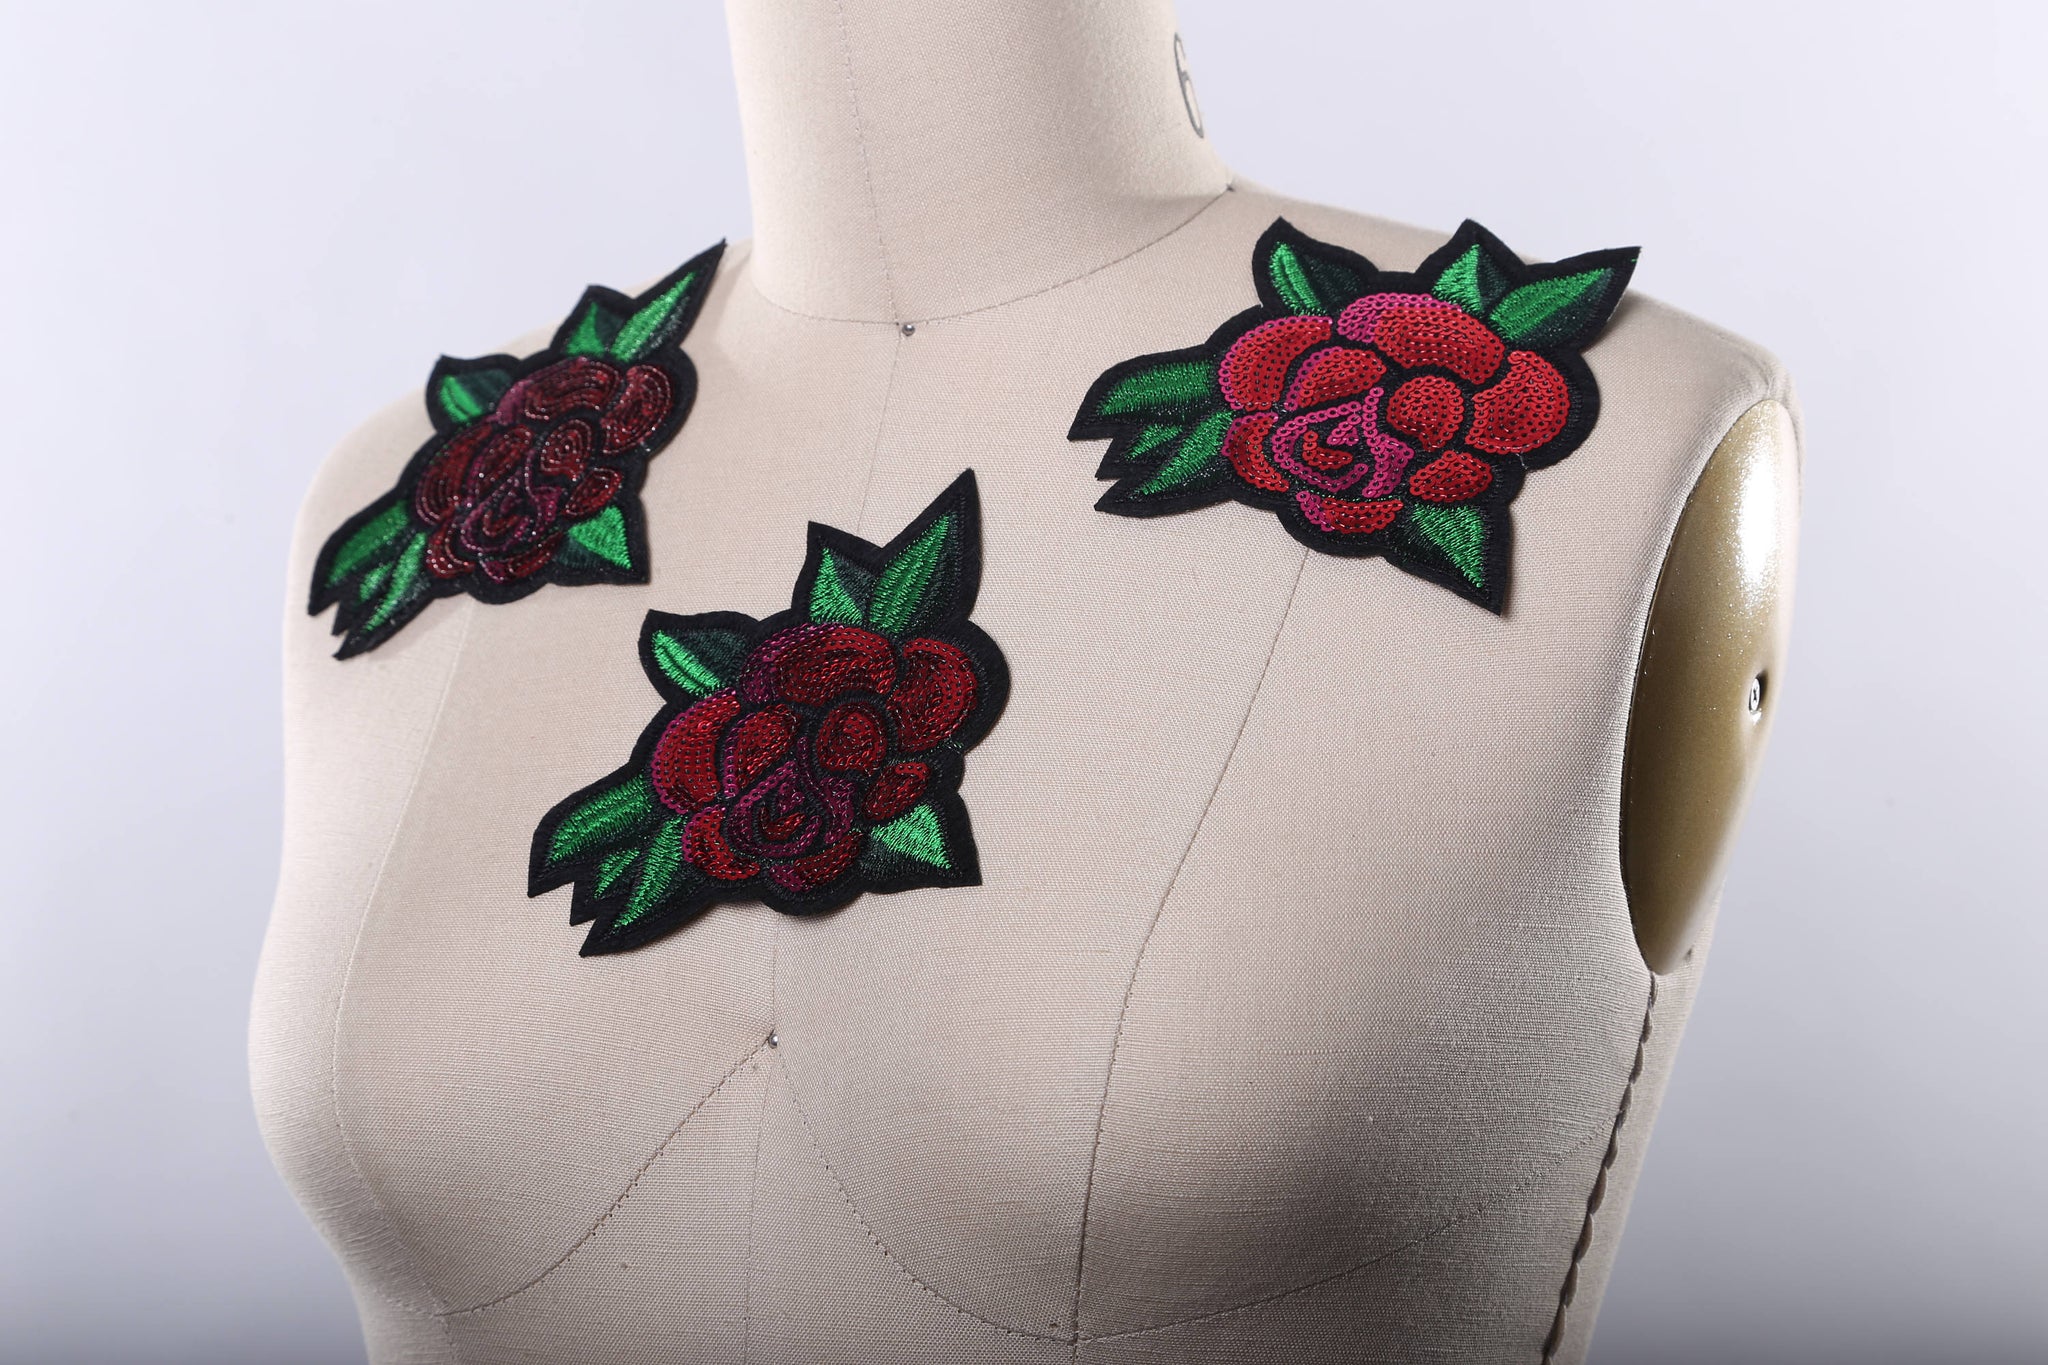 1 Vibrant Red and Green Leafs Sequined Rose Patch